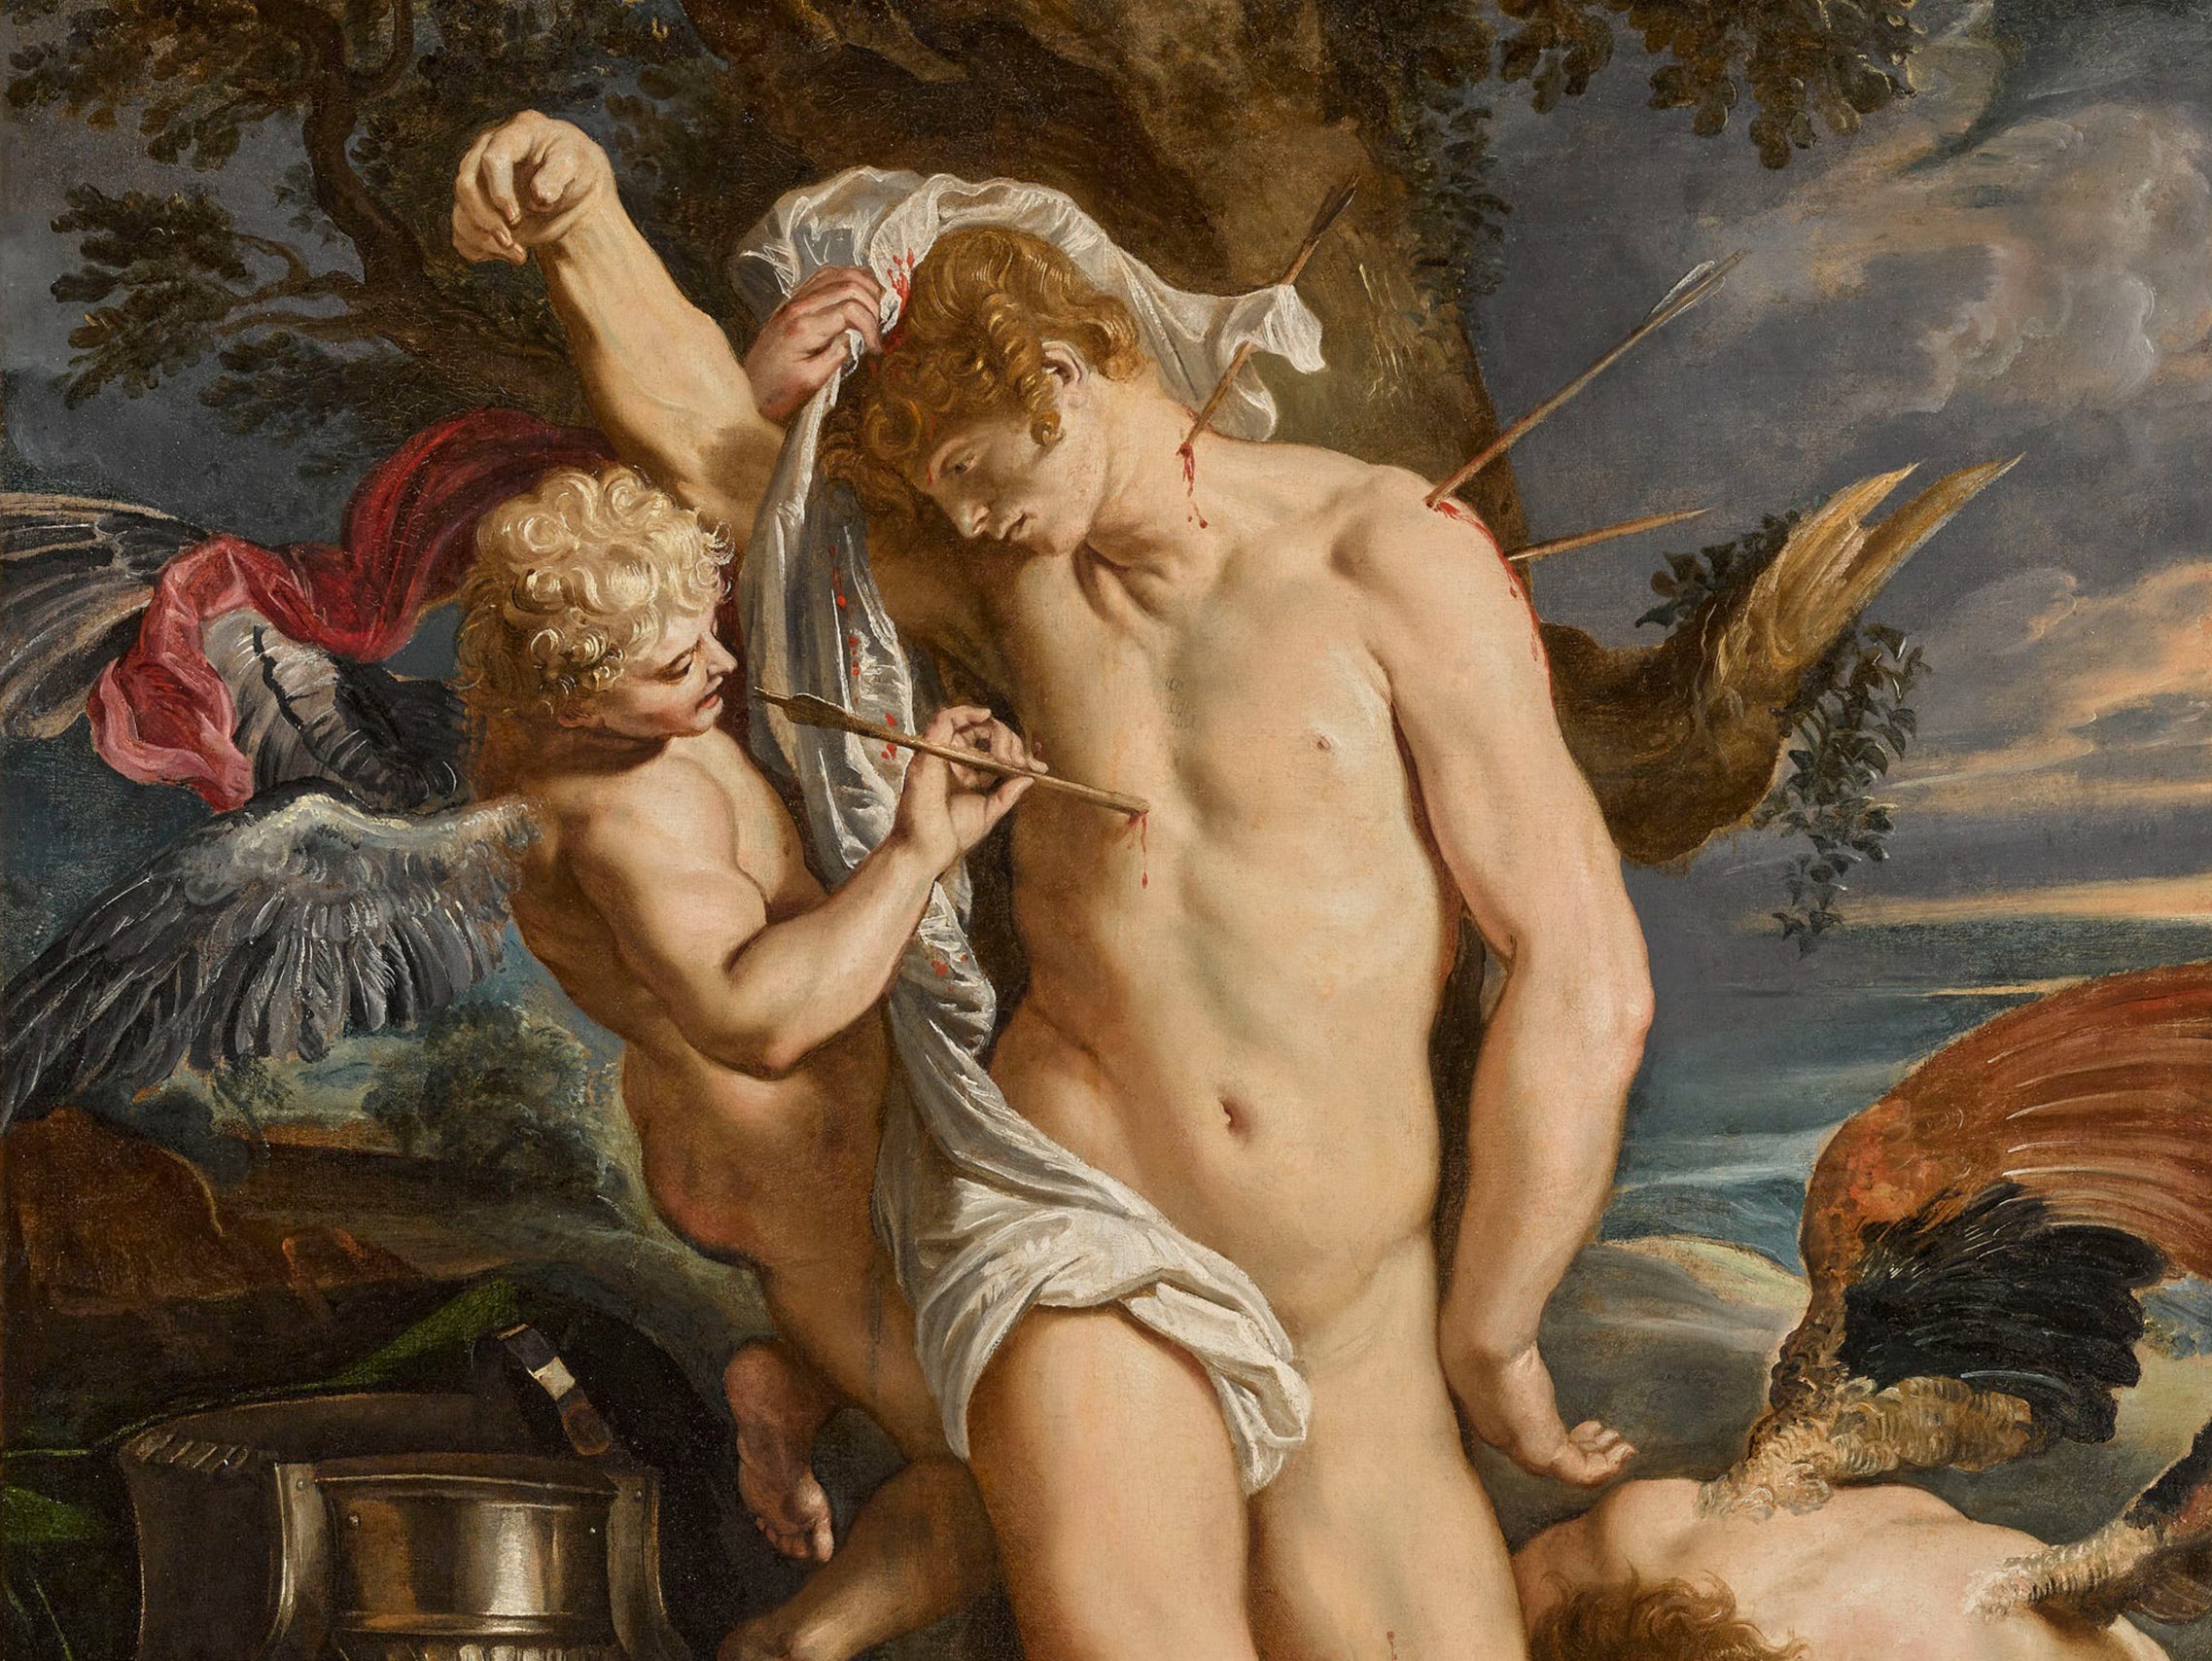 The painting by Sir Peter Paul Rubens was previously lost for centuries